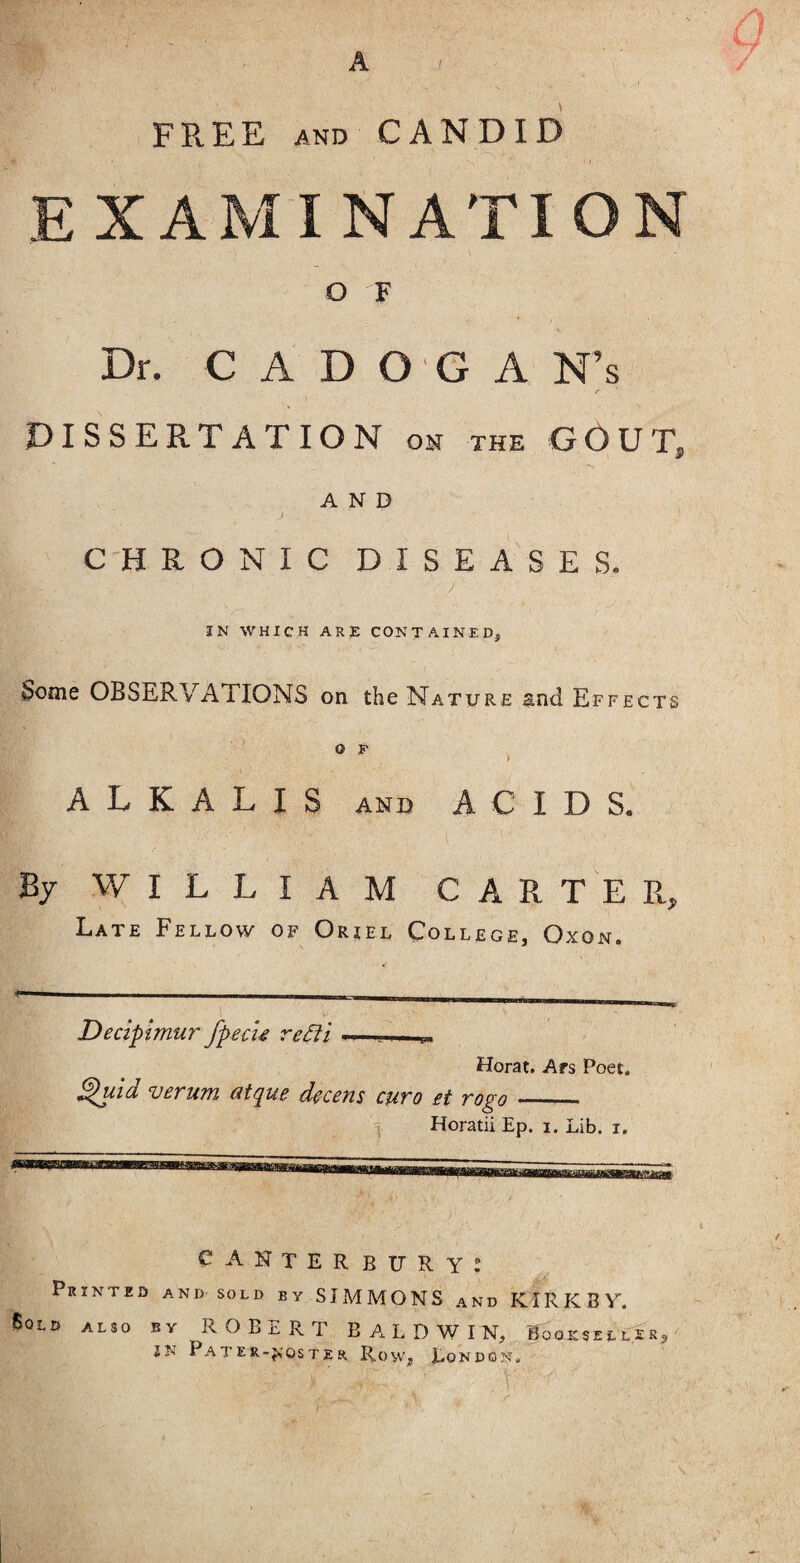 f / FREE AND CANDID EXAMINATION O F Dr. C A D O G A N’s DISSERTATION on the GOUT, -s. AND CHRONIC DISEASES. ) IN WHICH ARE CONTAINED, Some OBSERVATIONS on the Nature ^nd Effects O F ALKALIS AND ACIDS. By WILLIAM CARTER, Late Fellow of Oriel College, Oxon. - ■ - - - - . . ■_^ _^_ Decipimur fpecu re£ii - Herat. Ars Poet. ^Id verum atque decern euro et rogo_— Horatii Ep. i. Lib. i. Canterbury: Printed and sold by SIMMONS and KIRKBV. Sold also by ROBERT BALDWIN, Booksell'^r? ^ IN Pater-jjoster Row, London?. r